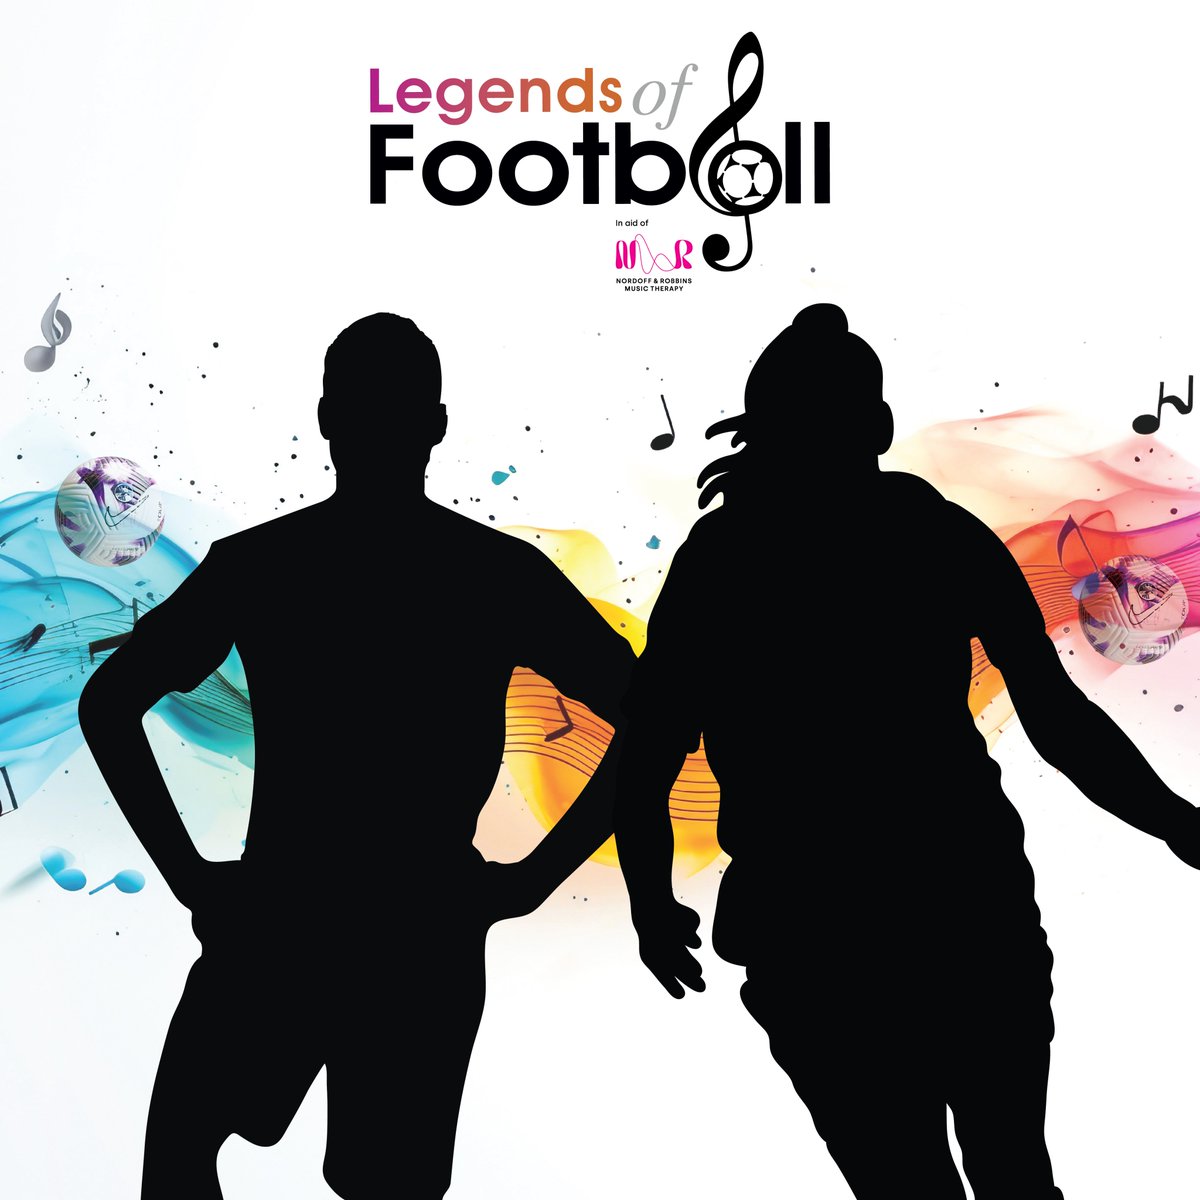 🚨ANNOUNCEMENT🚨 Soon we will be announcing the 2024 Legends of Football award recipients... Who will it be? Stay tuned to find out tomorrow at 10am👀 #football #charityaward #legend #footballannouncement #mysteryguest